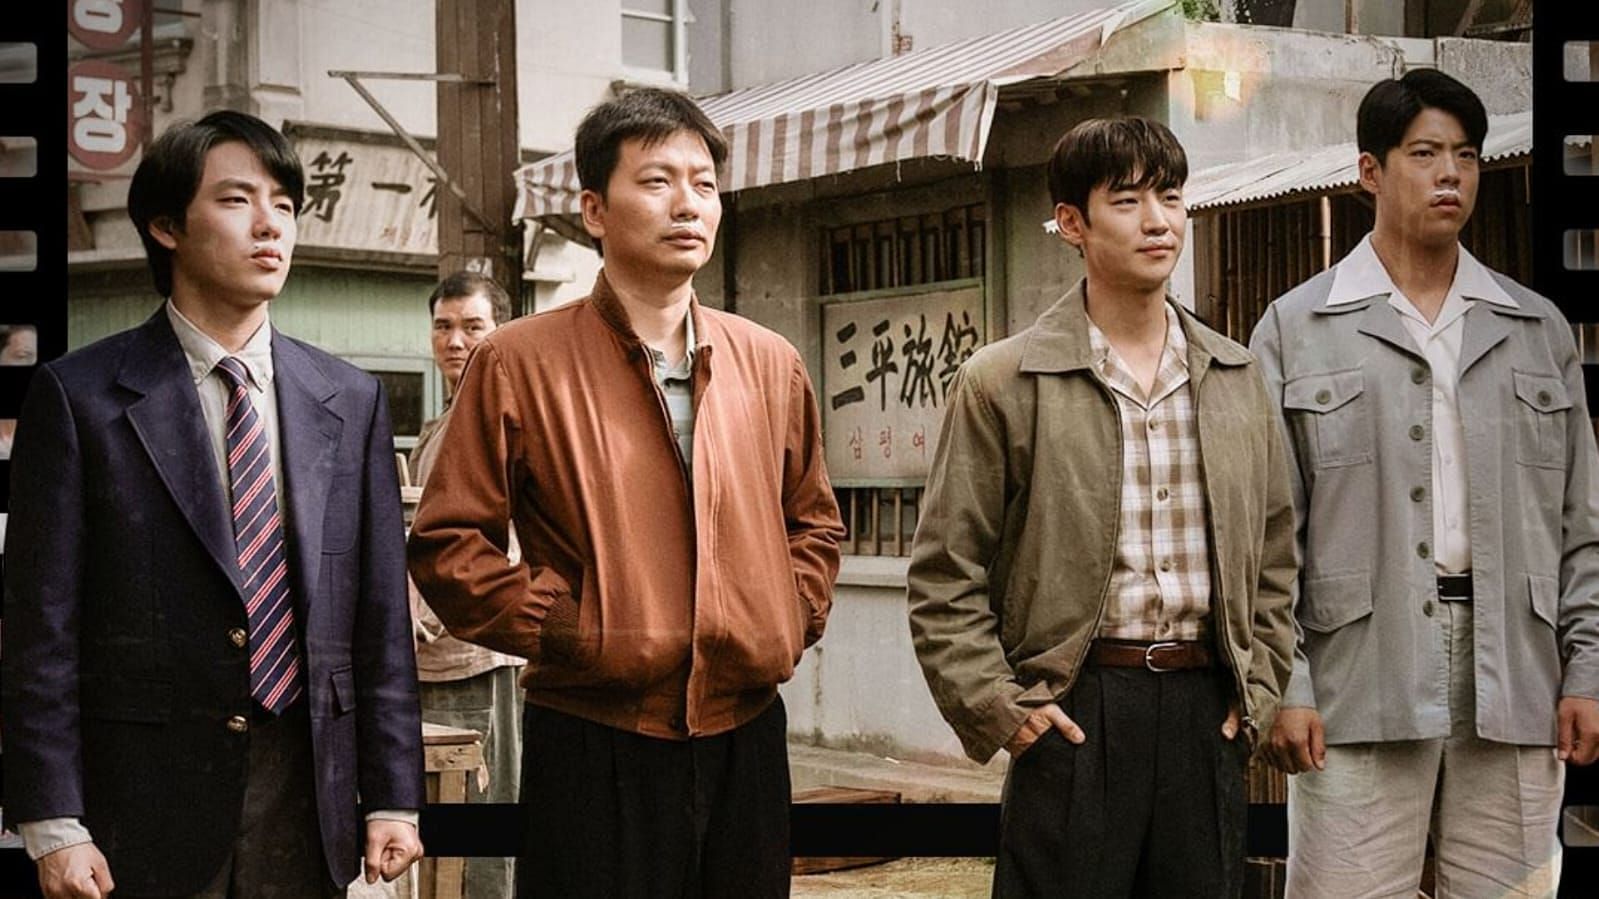 Featuring Yoon Hyun-soo, Lee Dong-hwi, Lee Je-hoon, and Choi Woo-sung (Image via mbcdrama_now/Instagram)